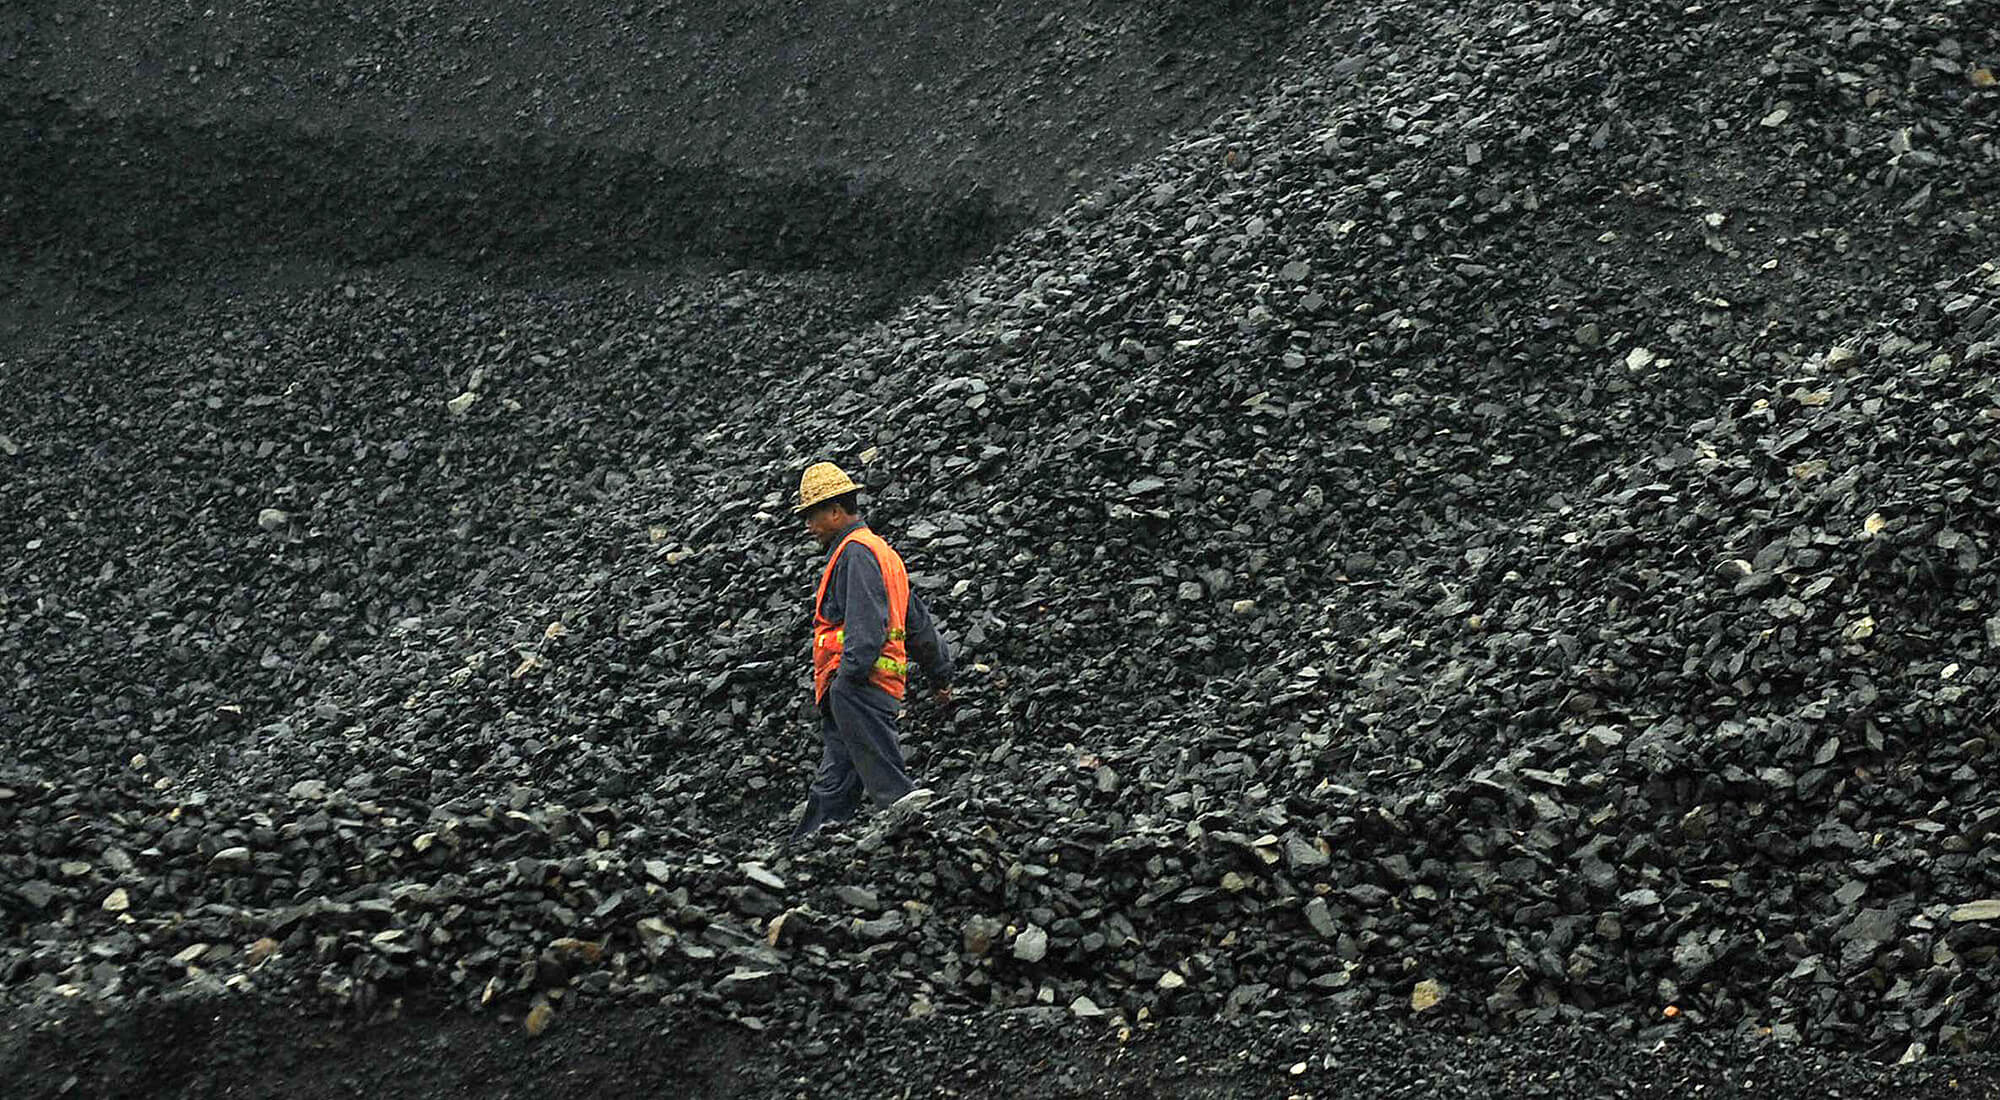 China’s coal capital is dying as local natural resources are exhausted